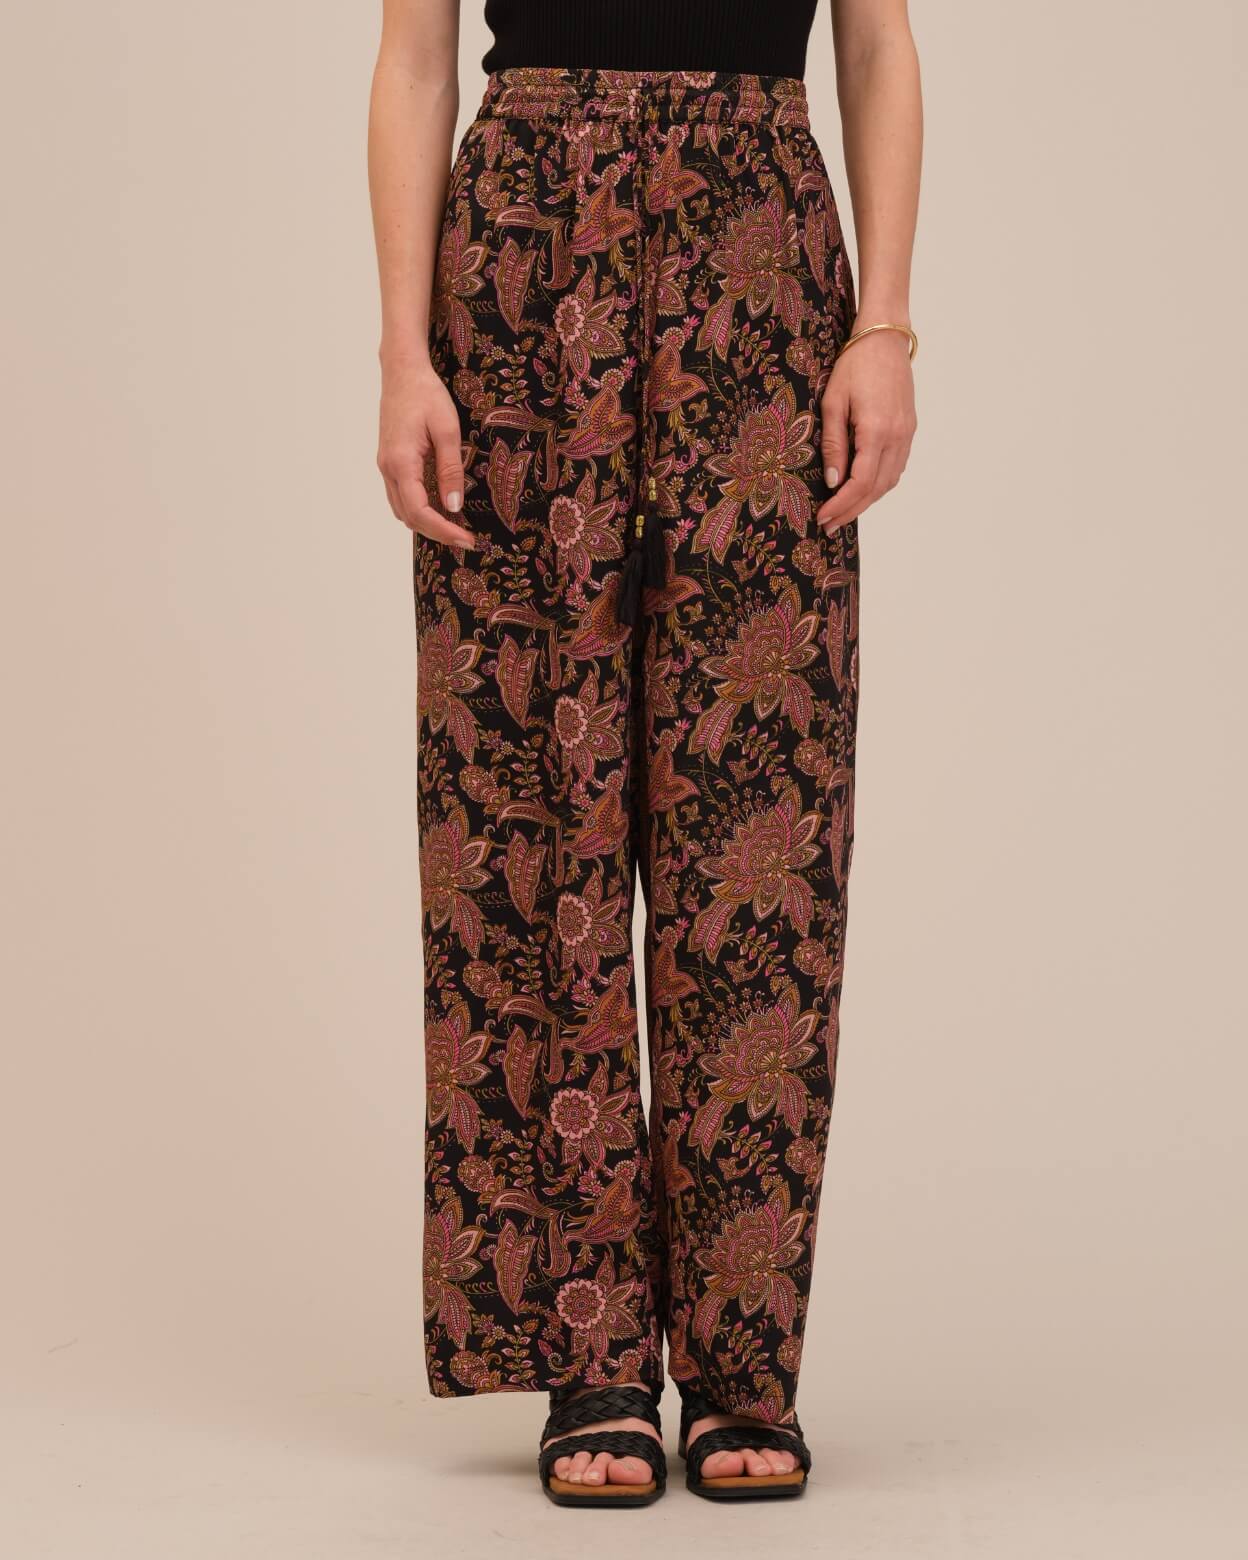 Zink London White Floral Print Trousers